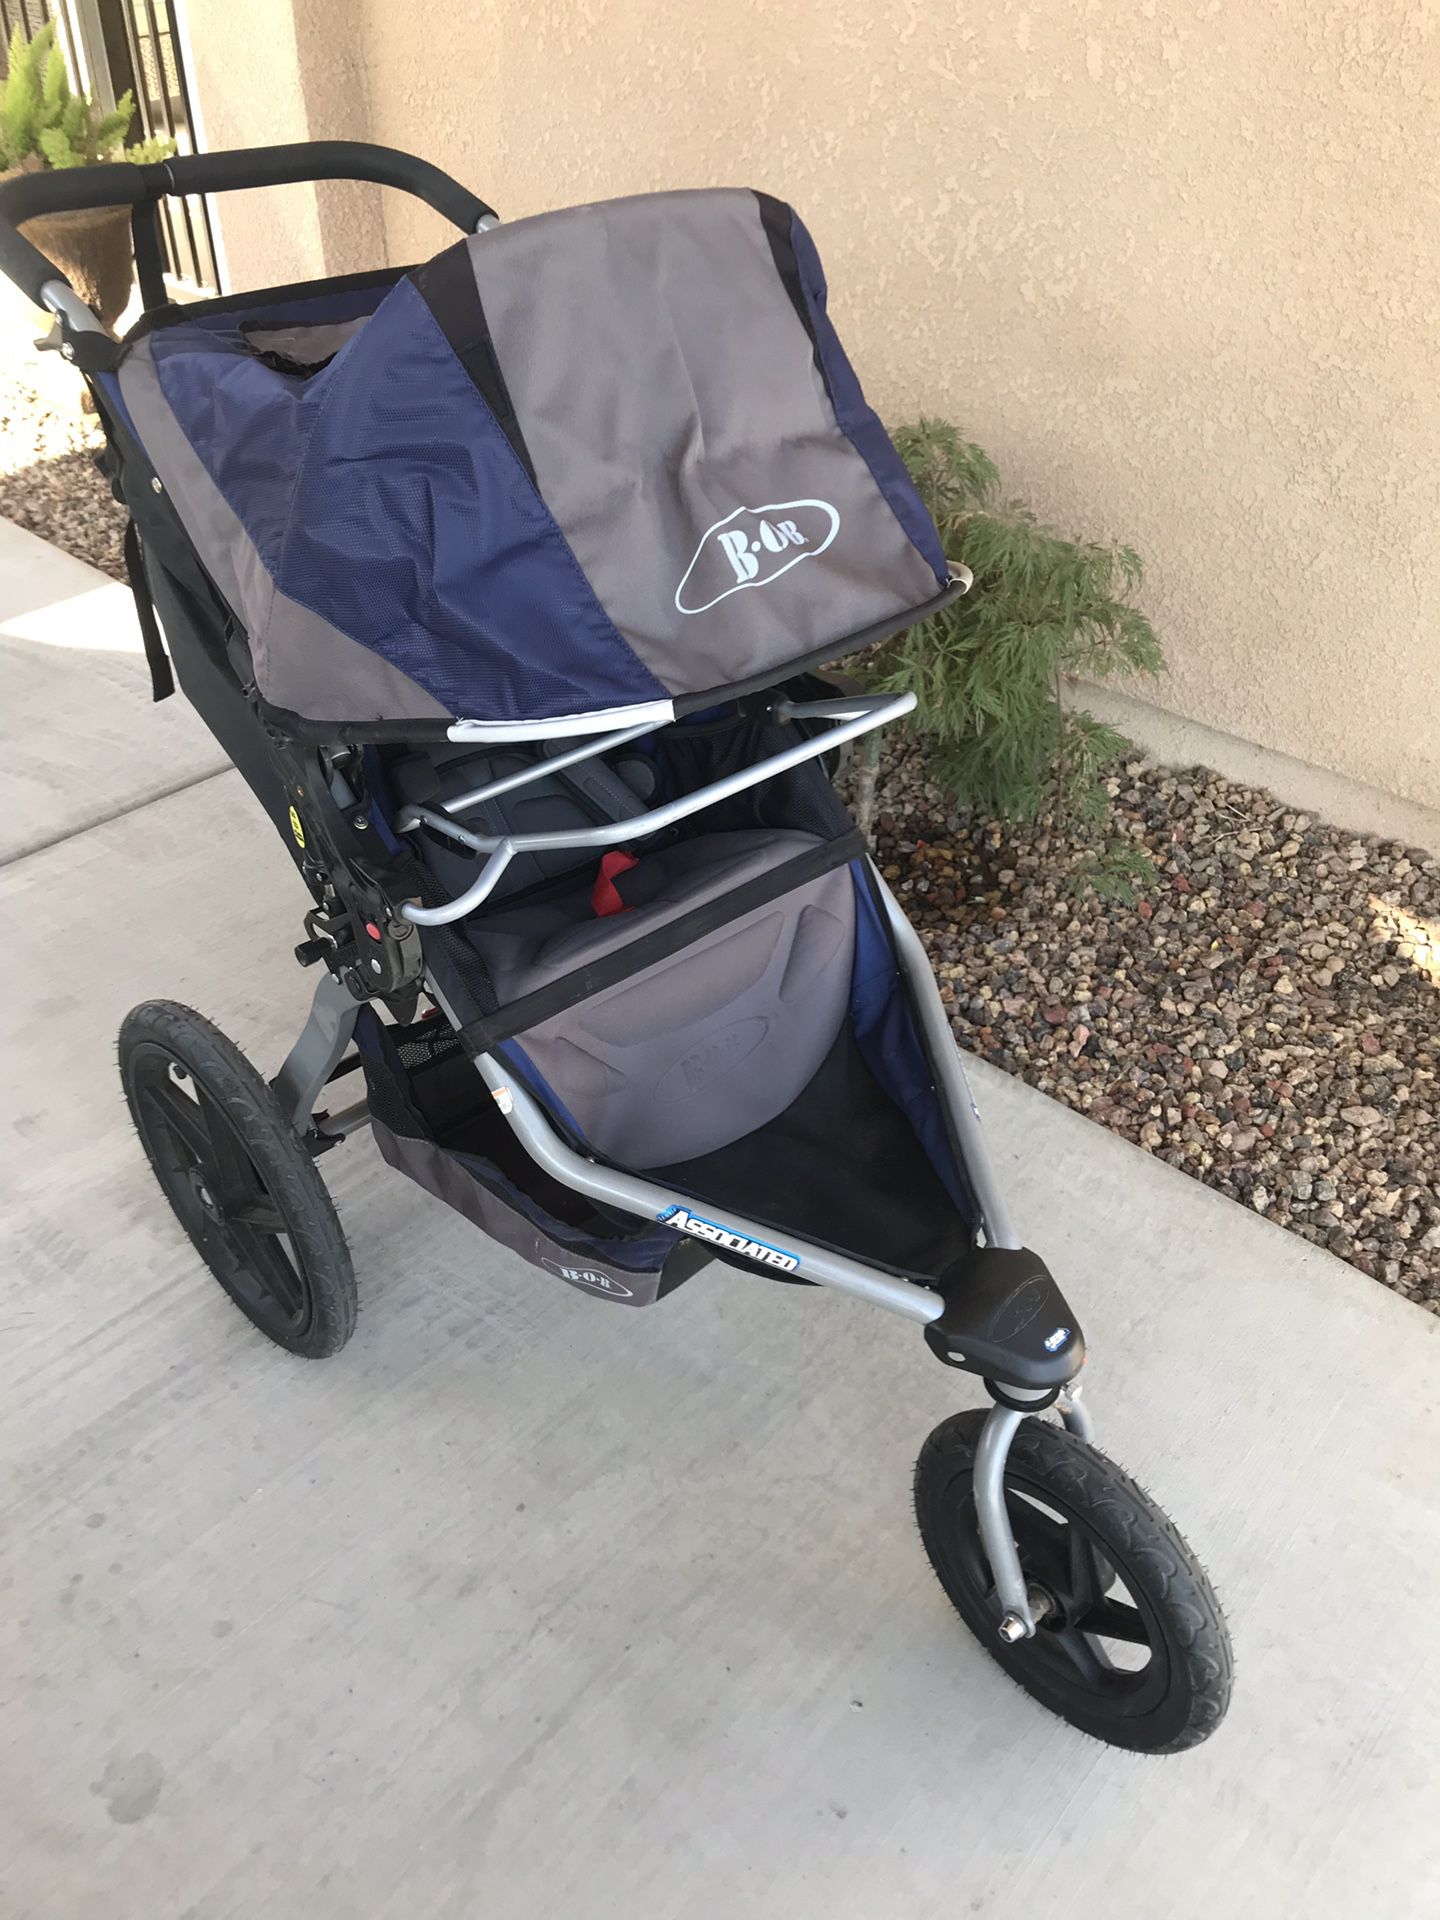 Bob jogging stroller with car seat adapter